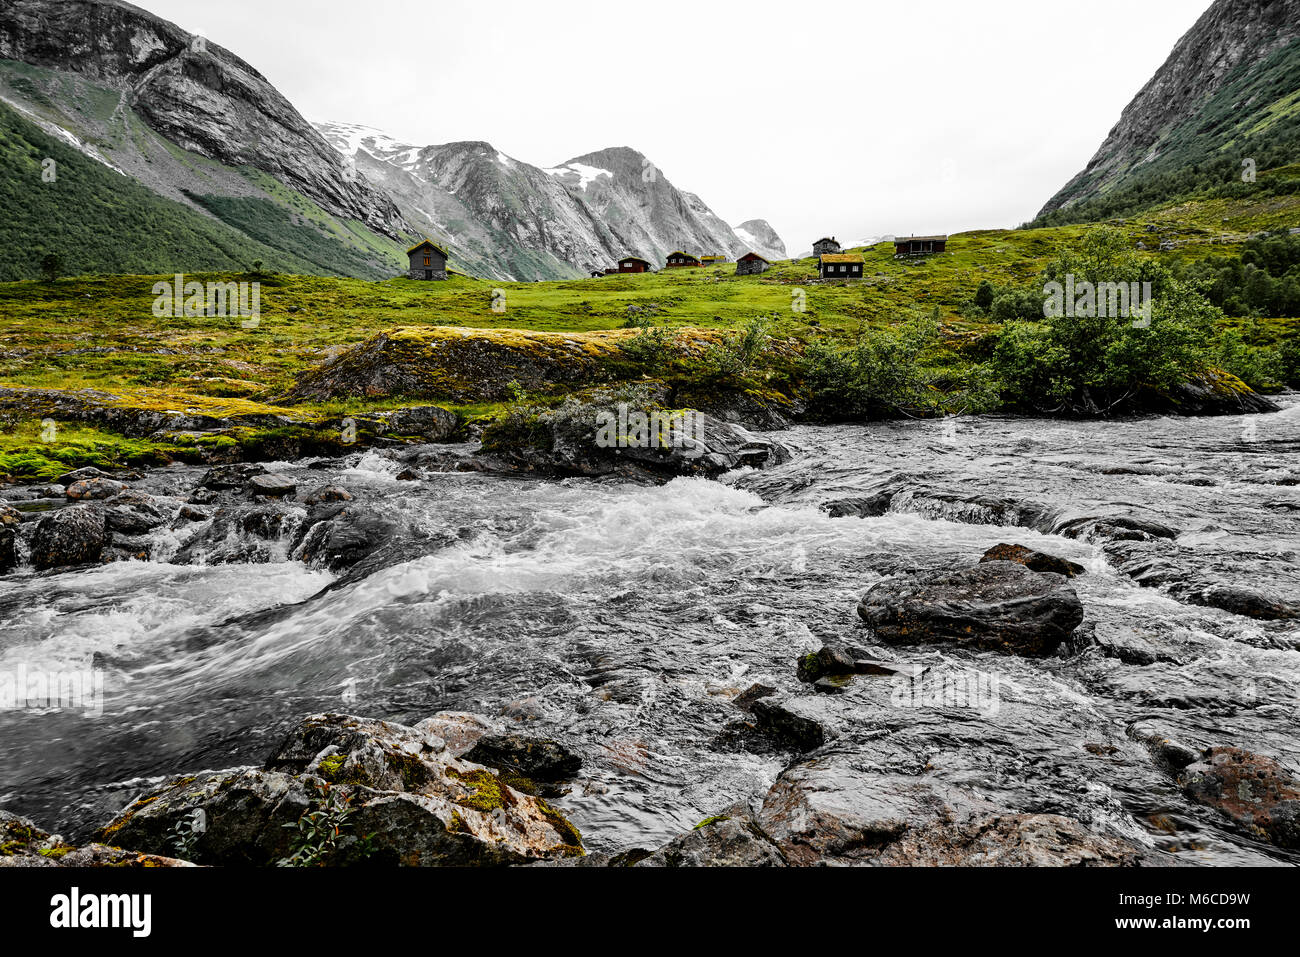 Beautiful river with clear water and a rocky shore. Colorful houses on green grass and snow capped mountains in the background in Norway. Stock Photo